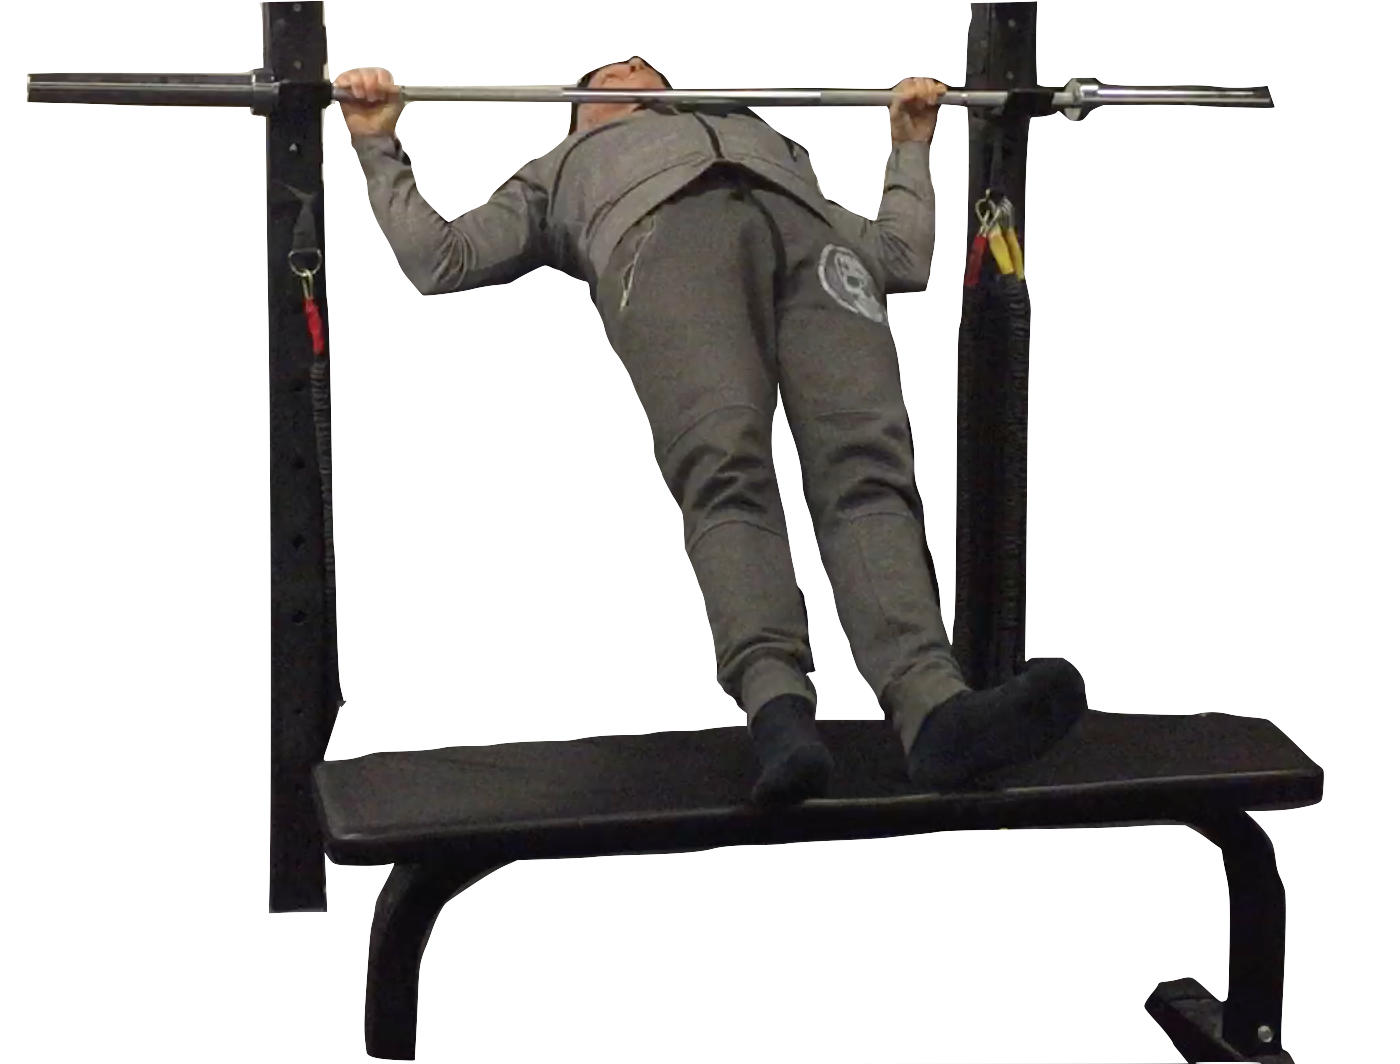 wide-grip-horizontal-pull-up